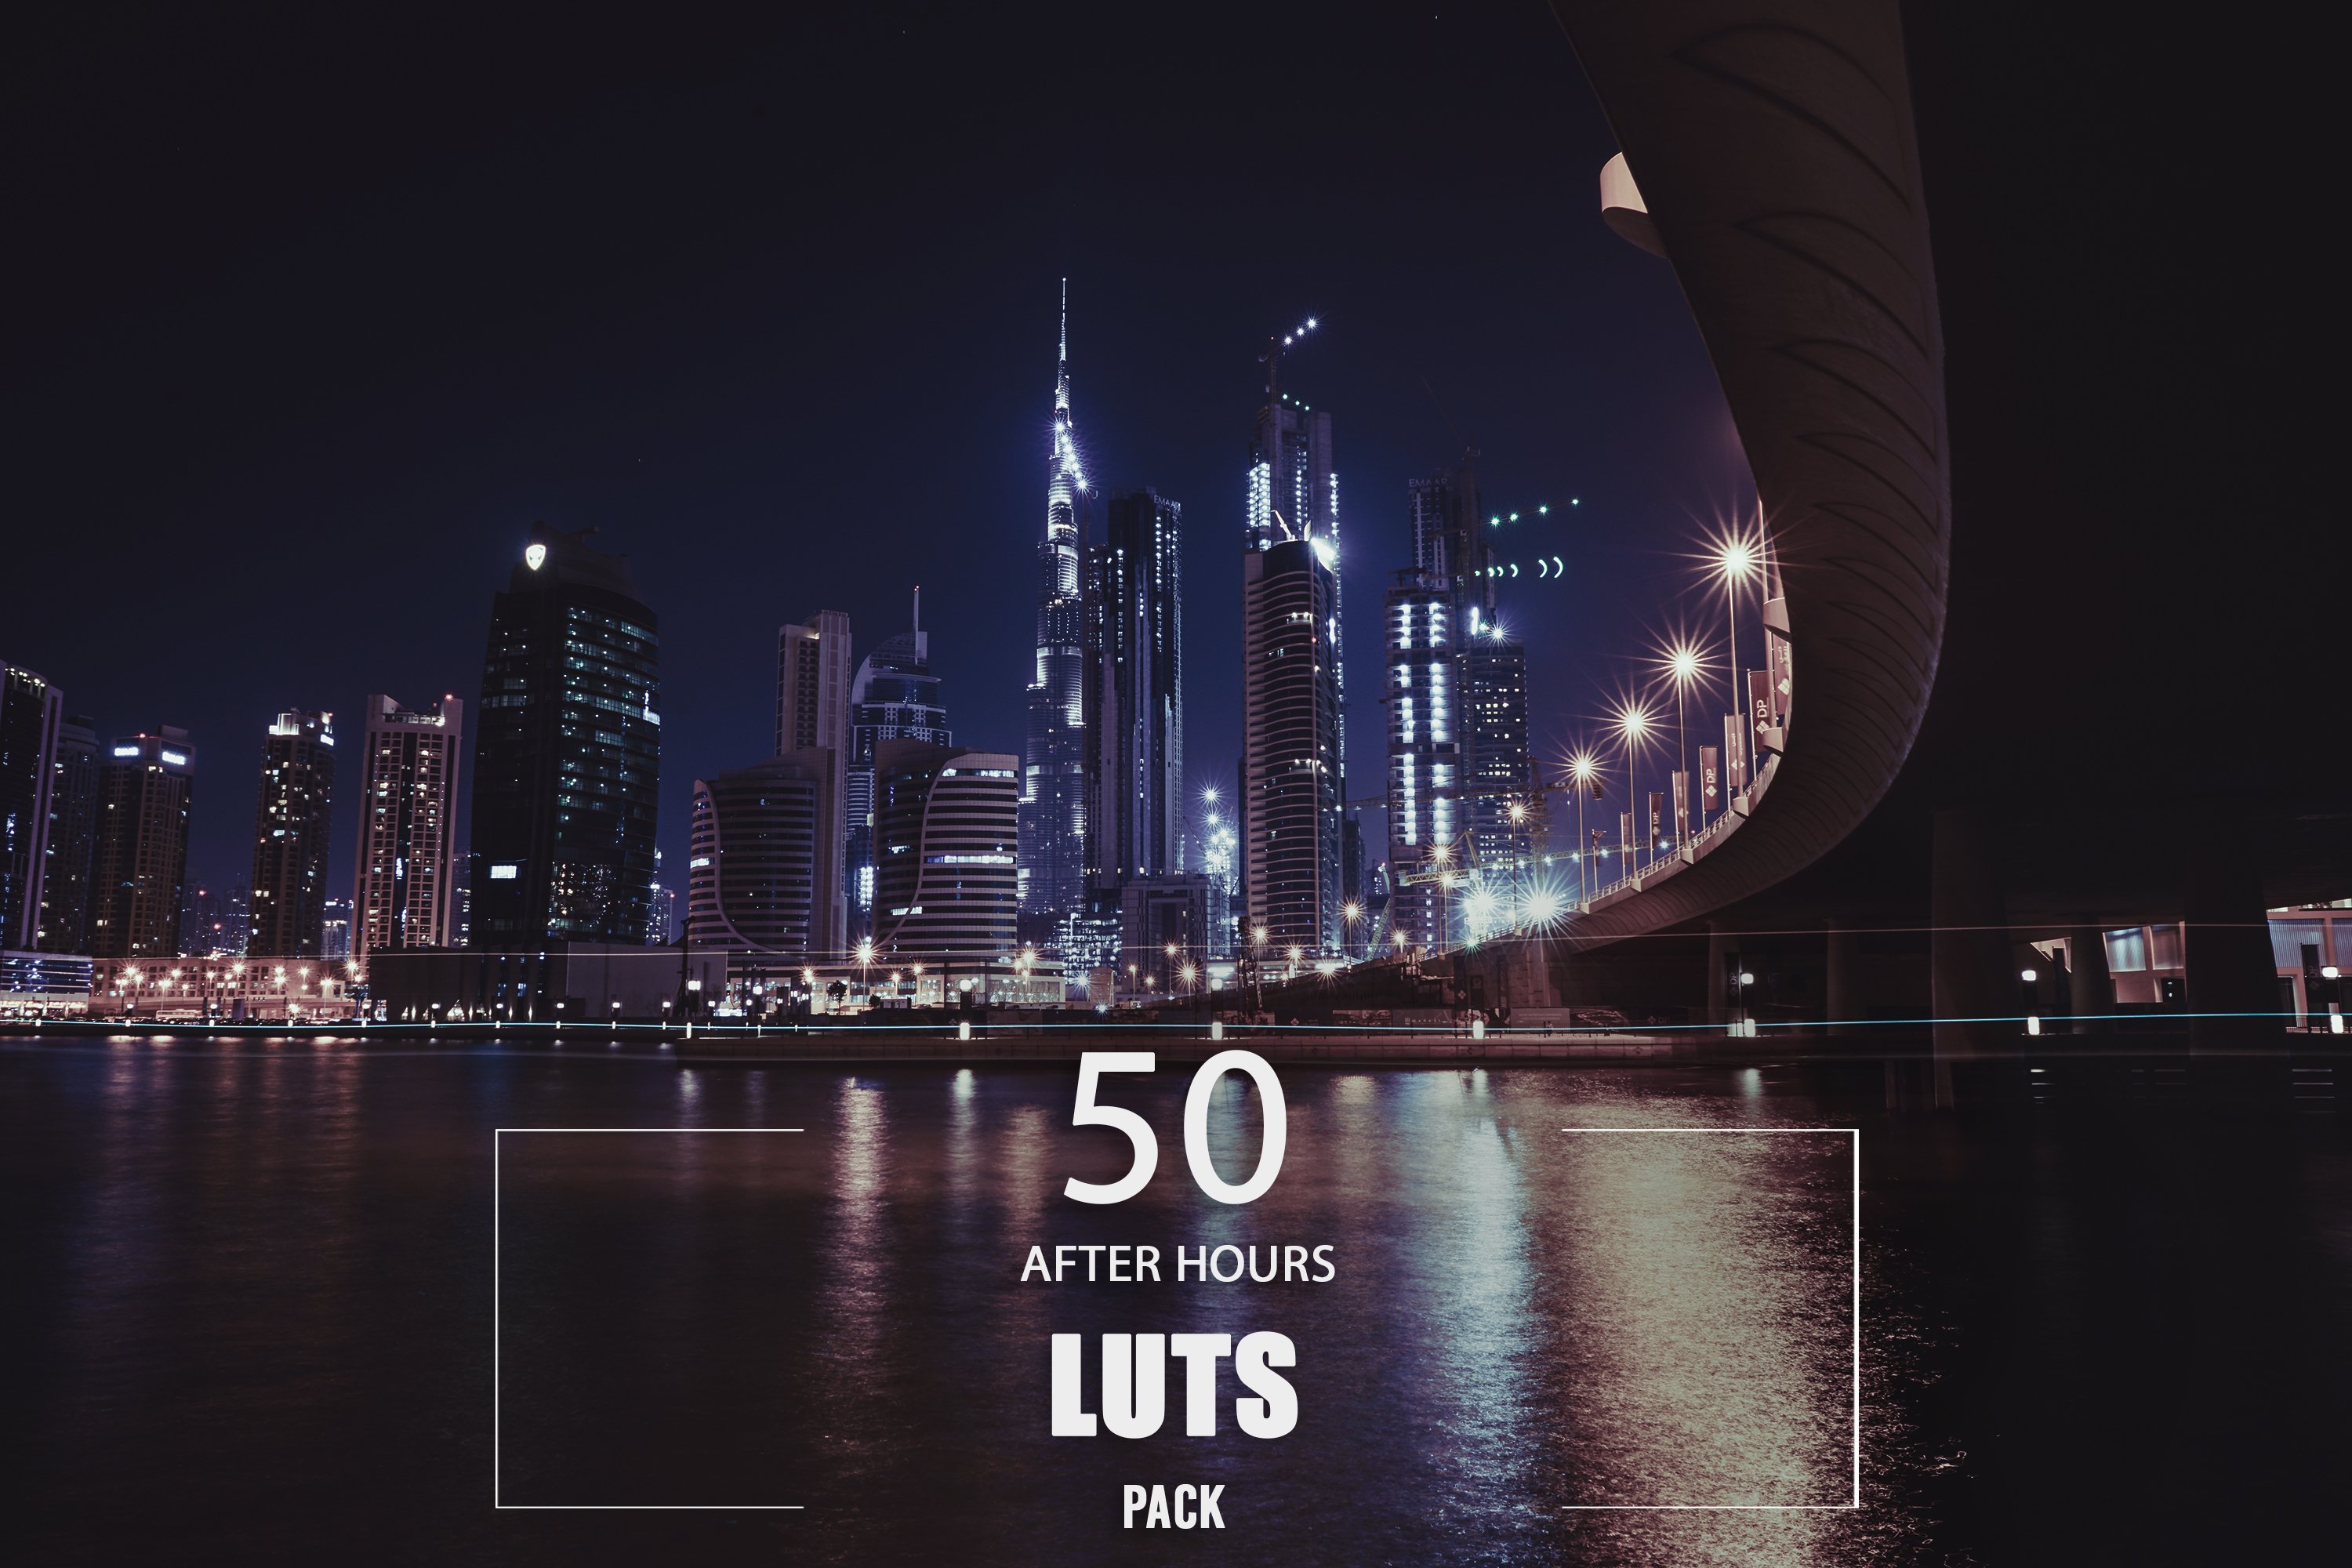 50 After Hours LUTs Packcover image.